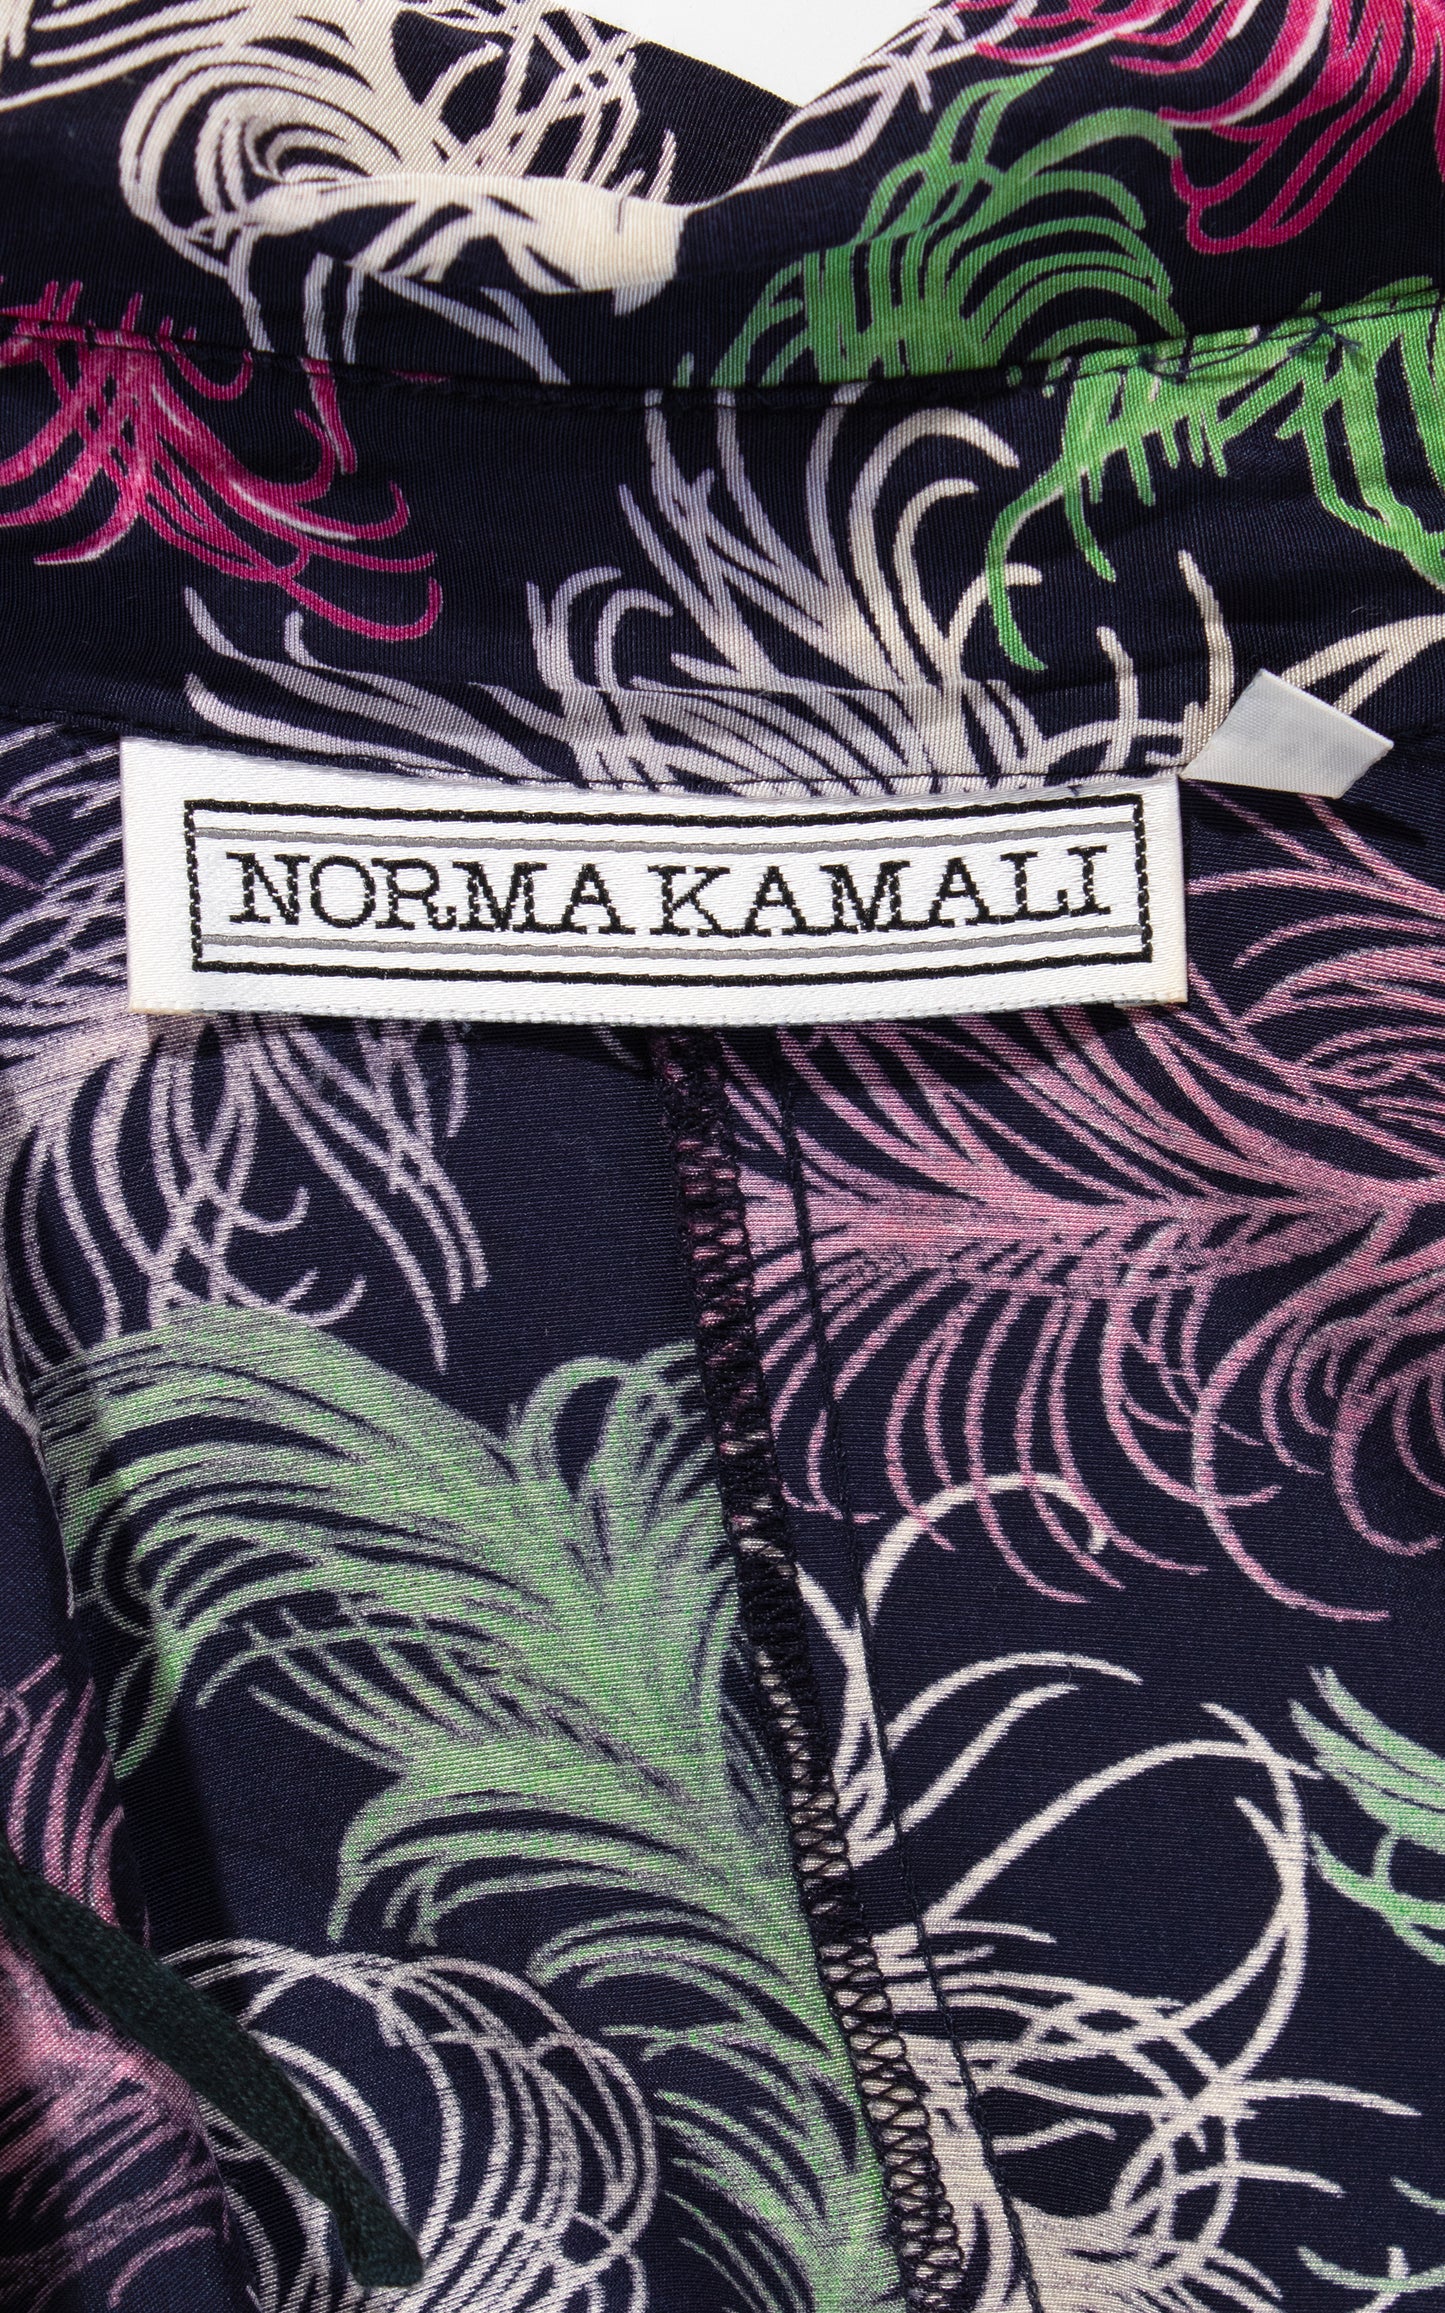 Vintage 80s 1980s does 1940s NORMA KAMALI Feather Print Rayon Blouse BirthdayLifeVintage